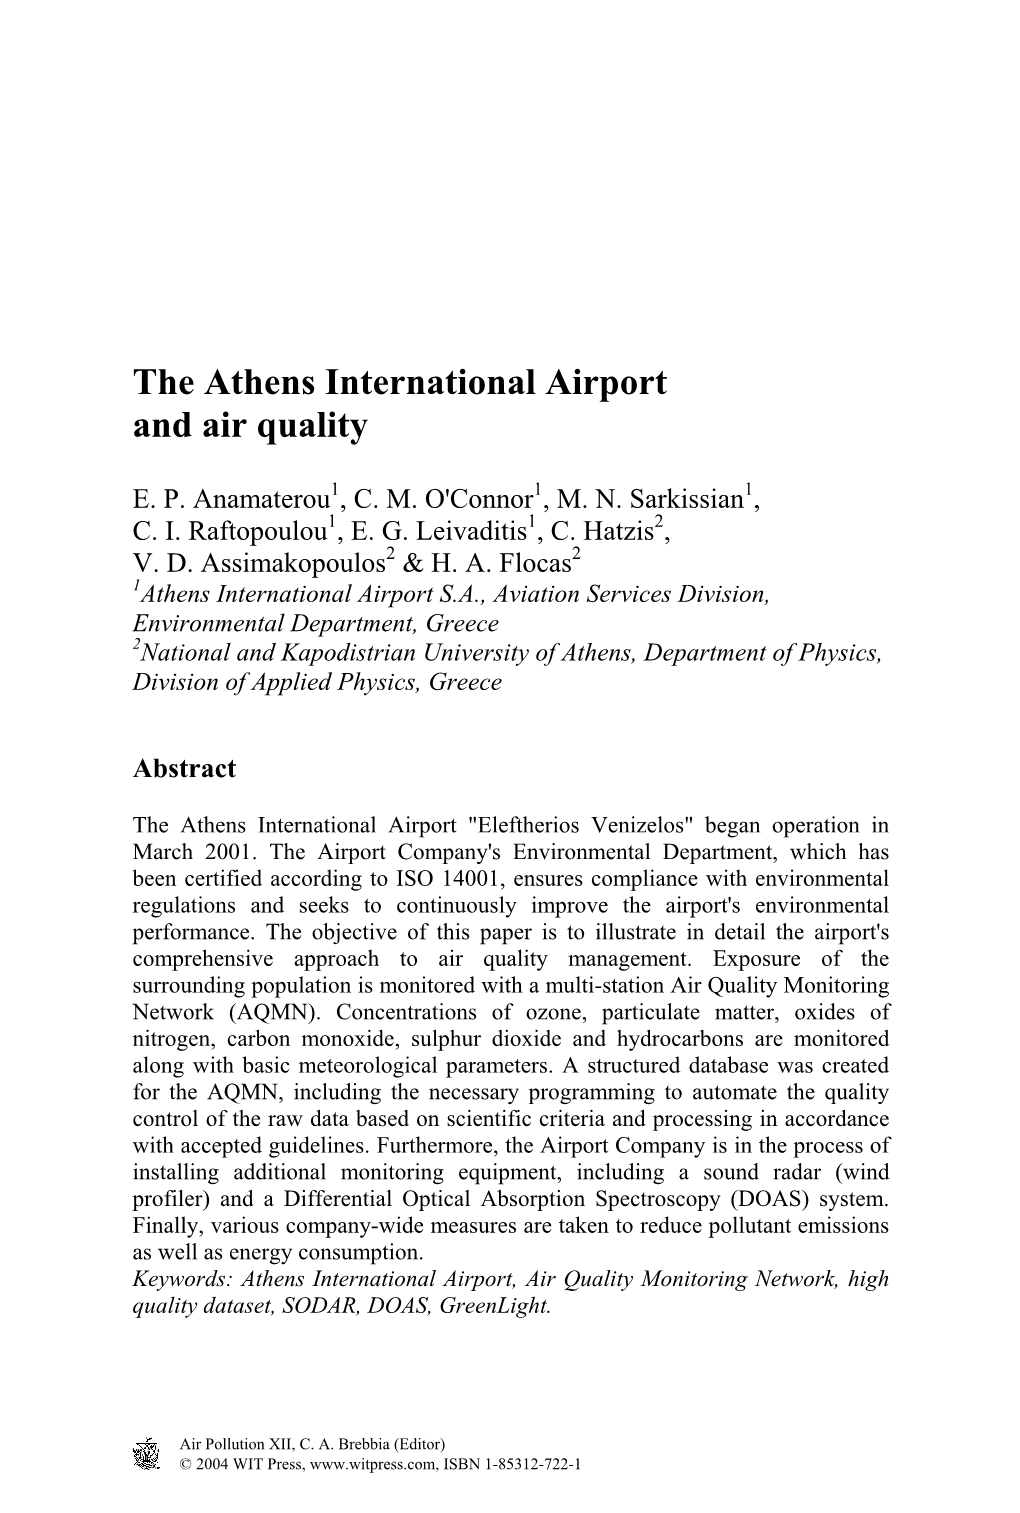 The Athens International Airport and Air Quality